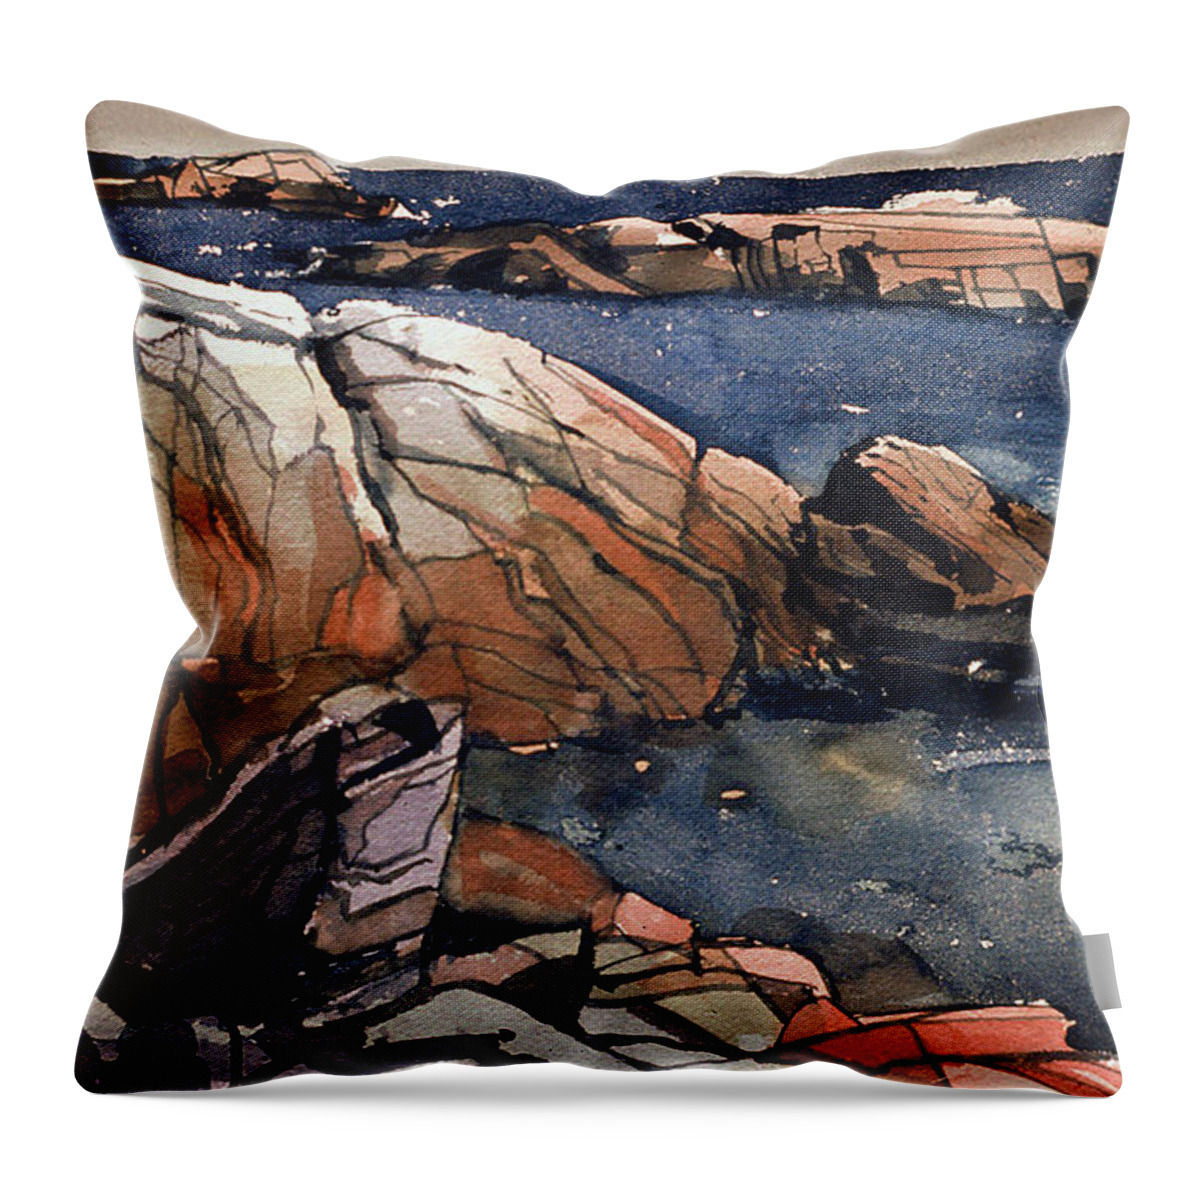 Acadia Throw Pillow featuring the painting Acadia Rocks #1 by Donald Maier